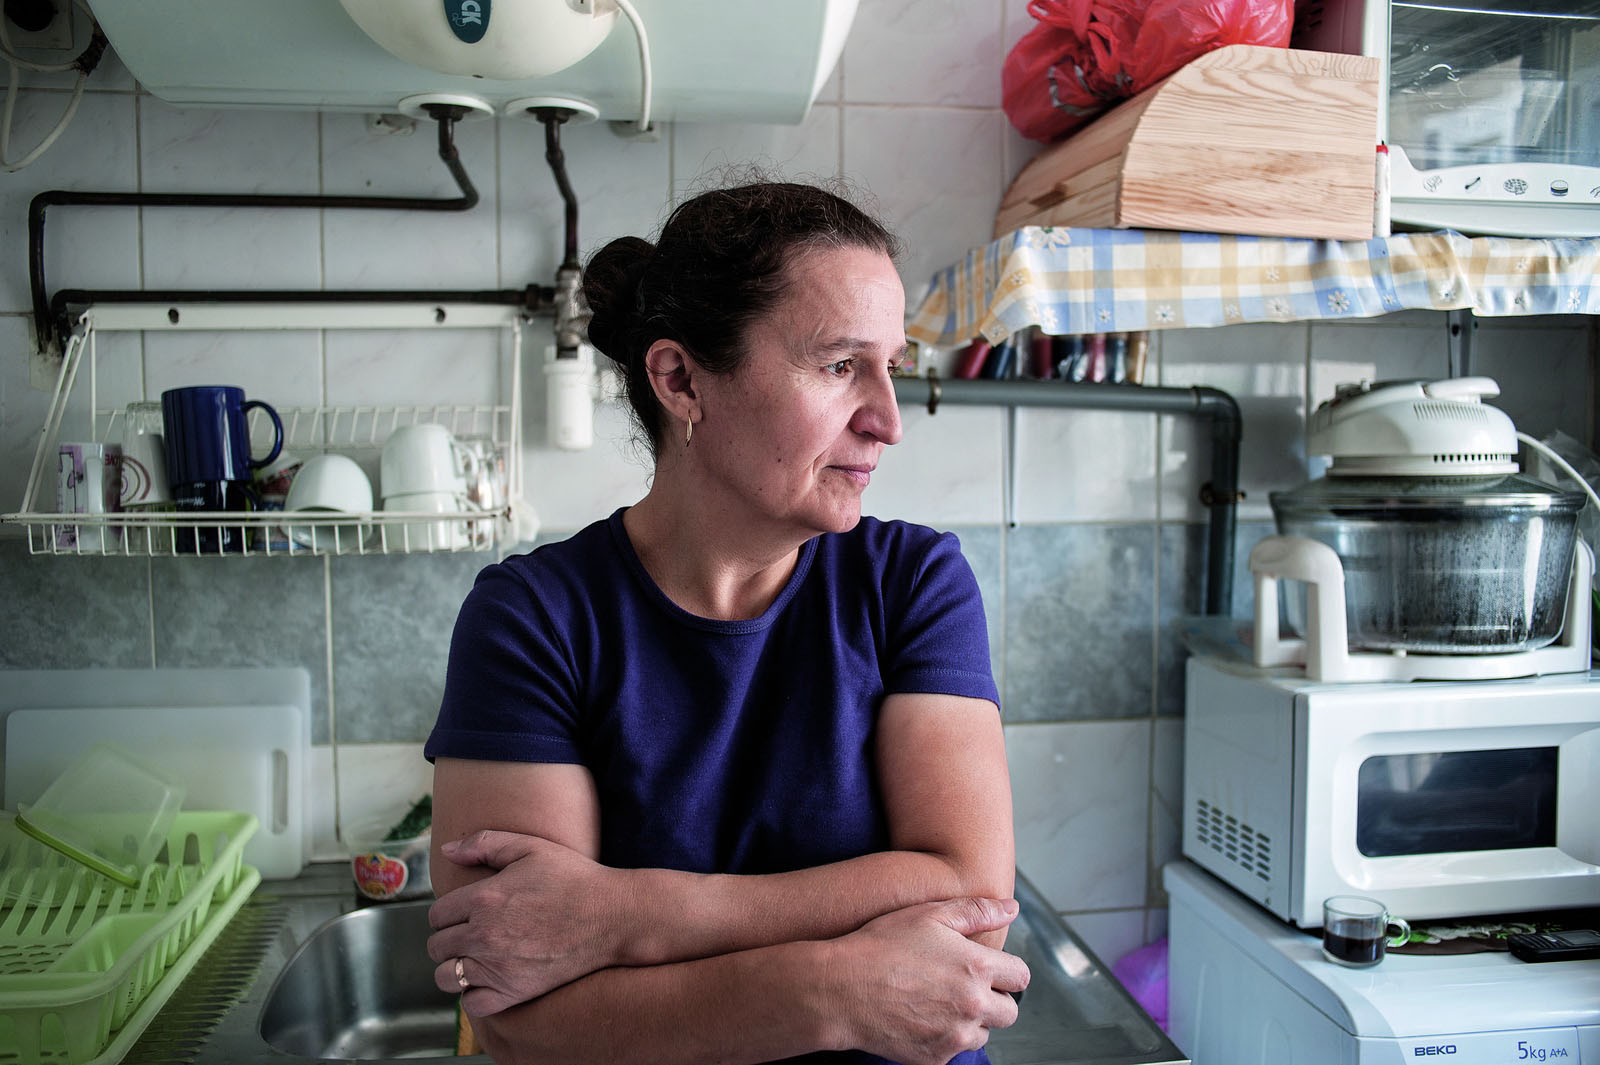 Lica has been working cleaning houses in Paris for 15 years (photo Â© Petrut Calinescu)